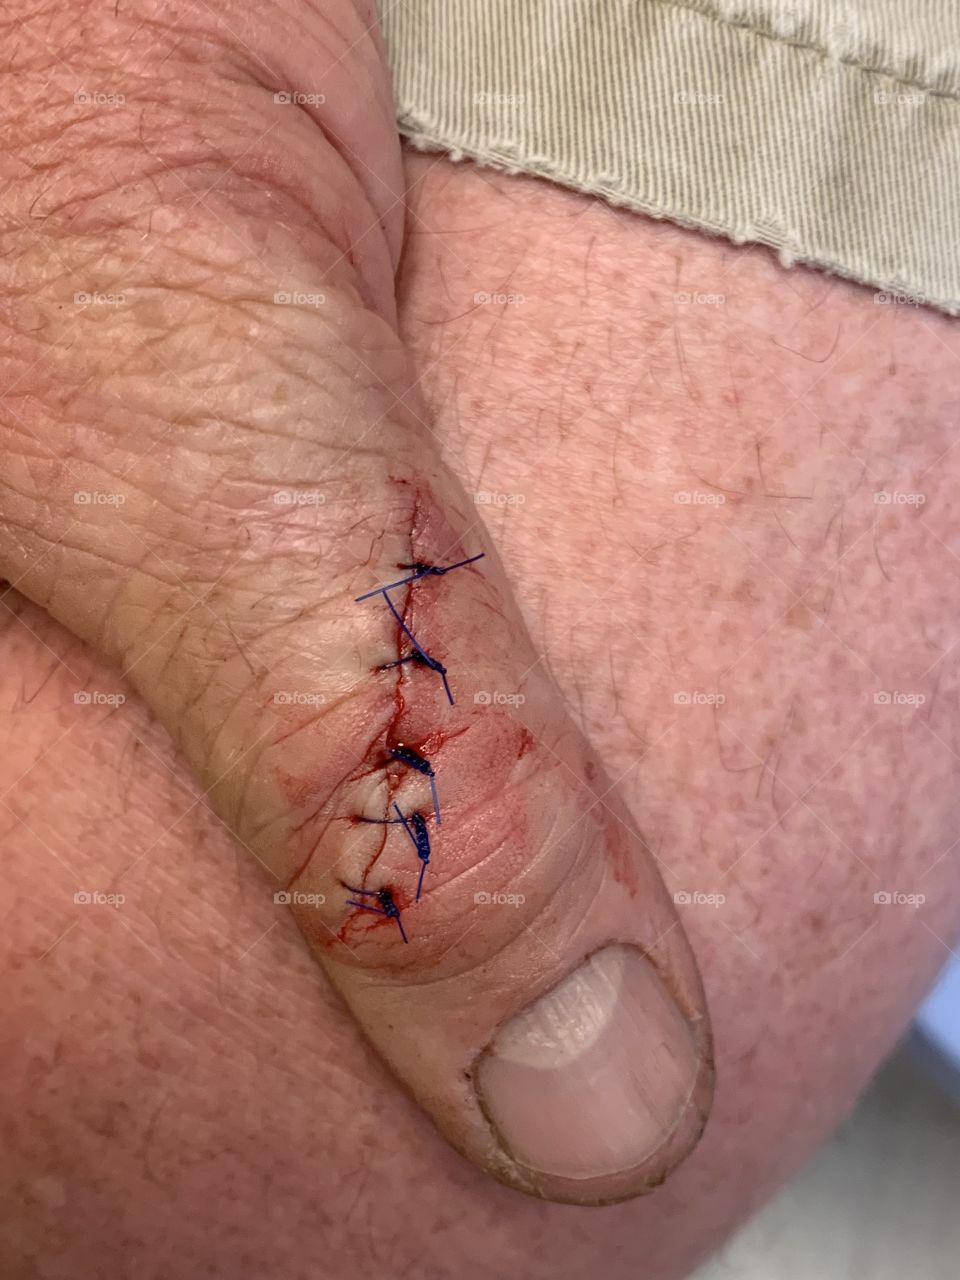 Stitches in thumb